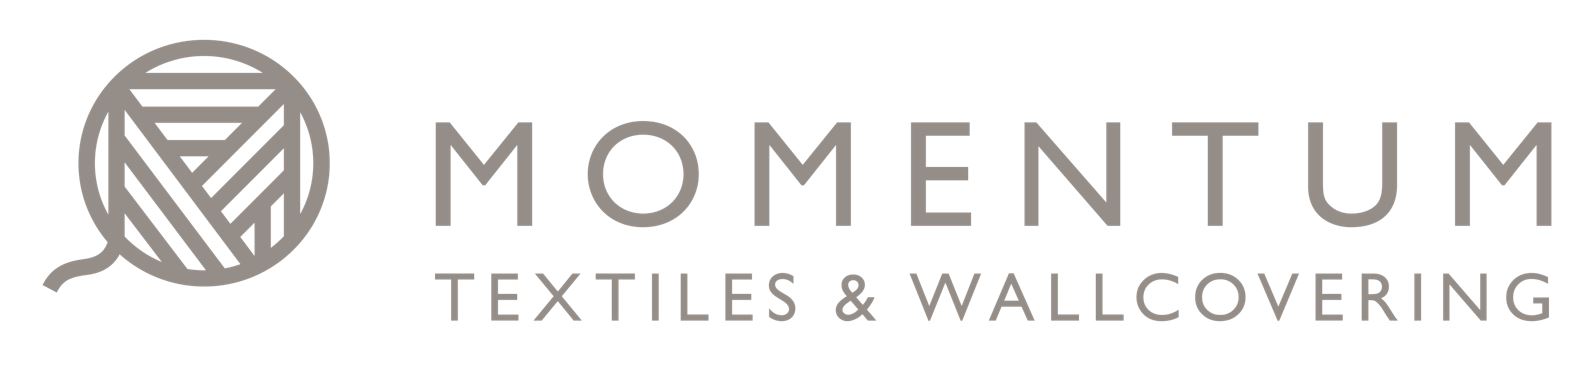 Momentum Textiles and Wallcovering